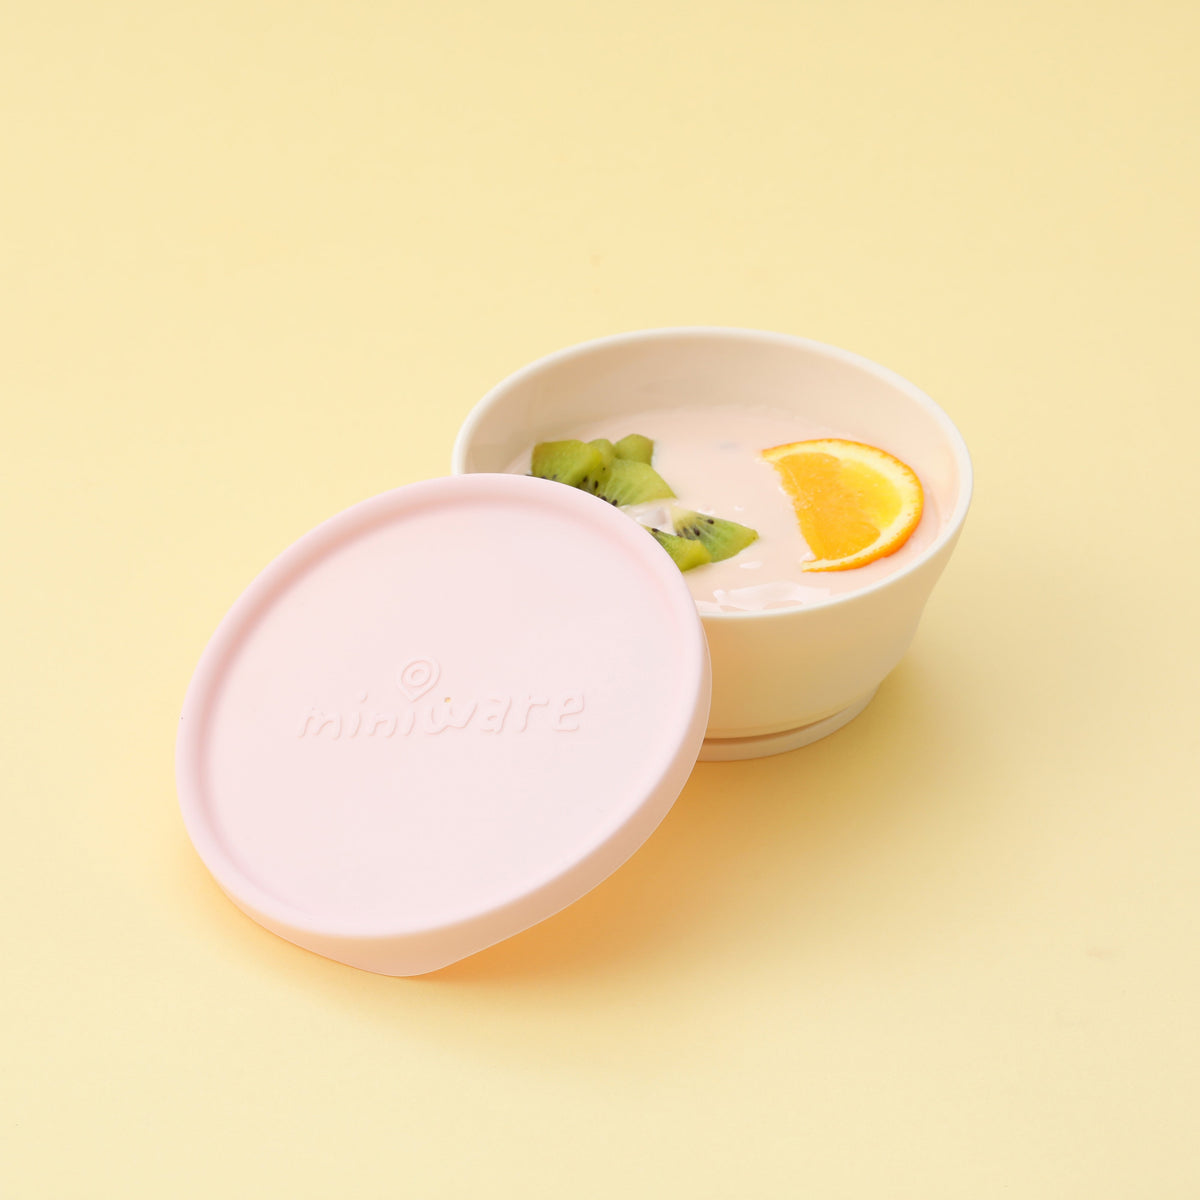 miniware-first-bite-set-pla-cereal-suction-bowl-vanilla-+-silicone-spoon-and-cover-in-cotton-candy- (12)